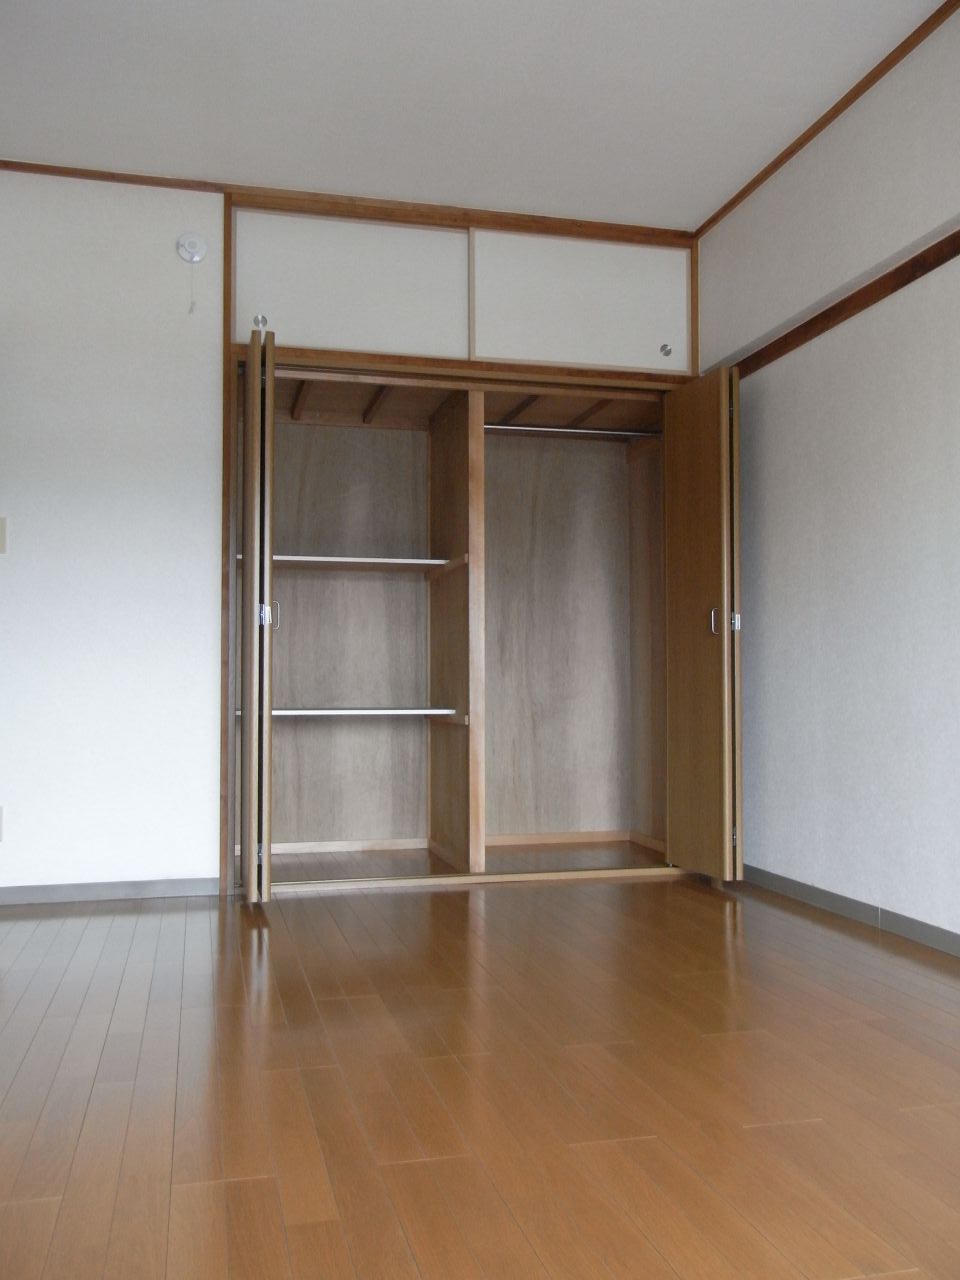 Other room space. Western style room ・ closet